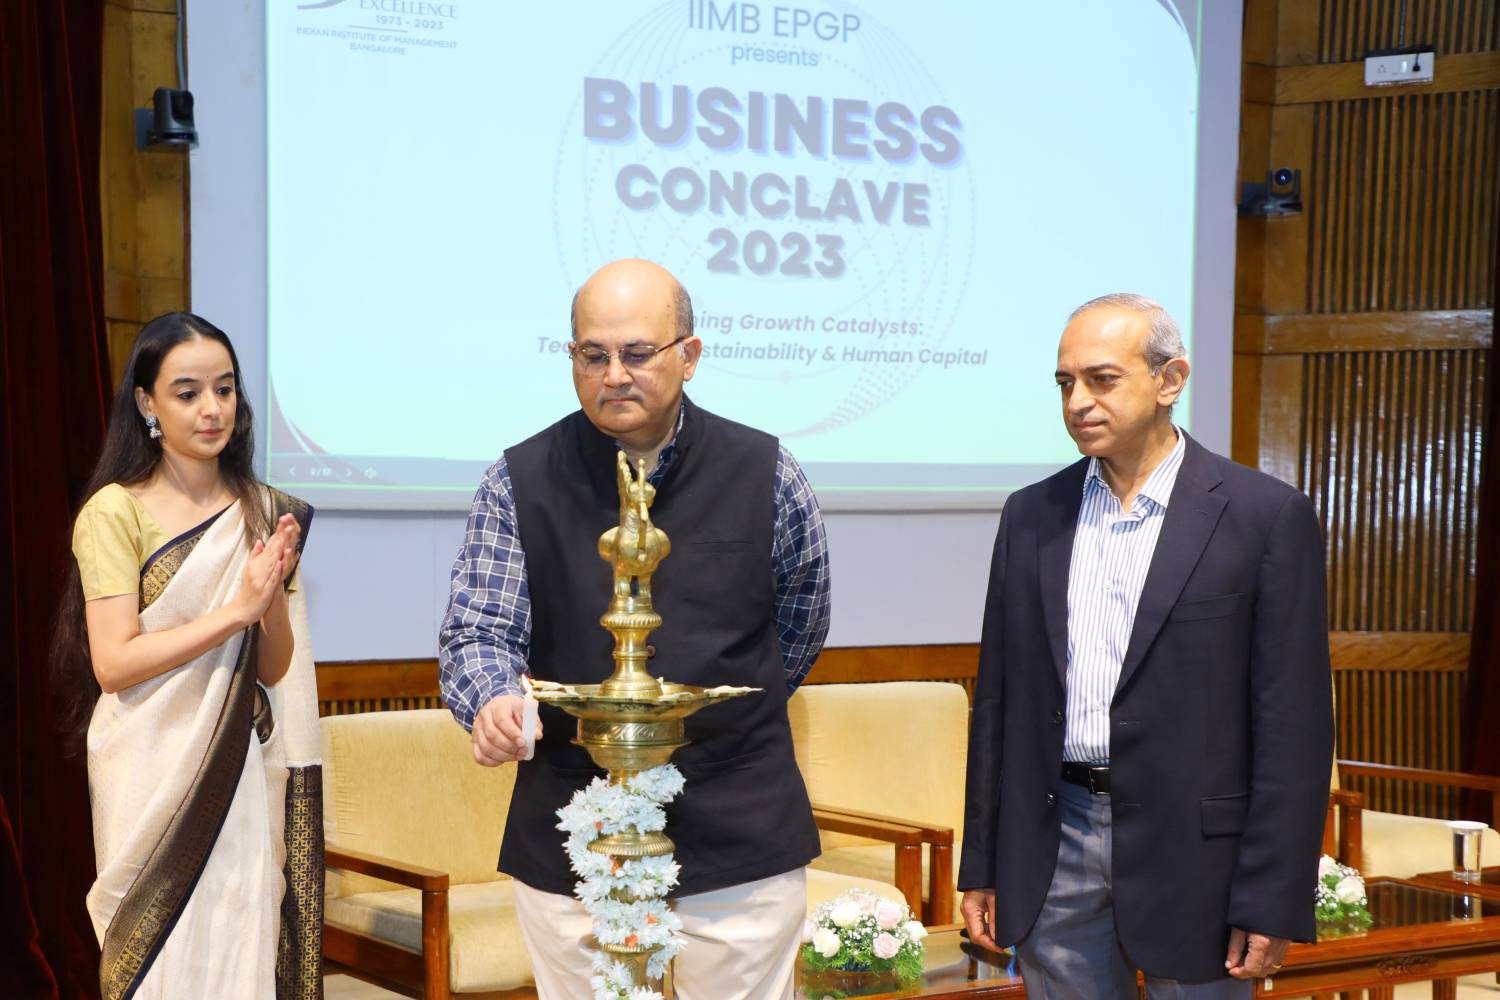 Professor Rishikesha T. Krishnan, Director, IIM Bangalore, inaugurated the EPGP Business Conclave 2023, organized by students of the Executive Post Graduate Programme in Management (EPGP) at IIMB, on 24th September 2023.